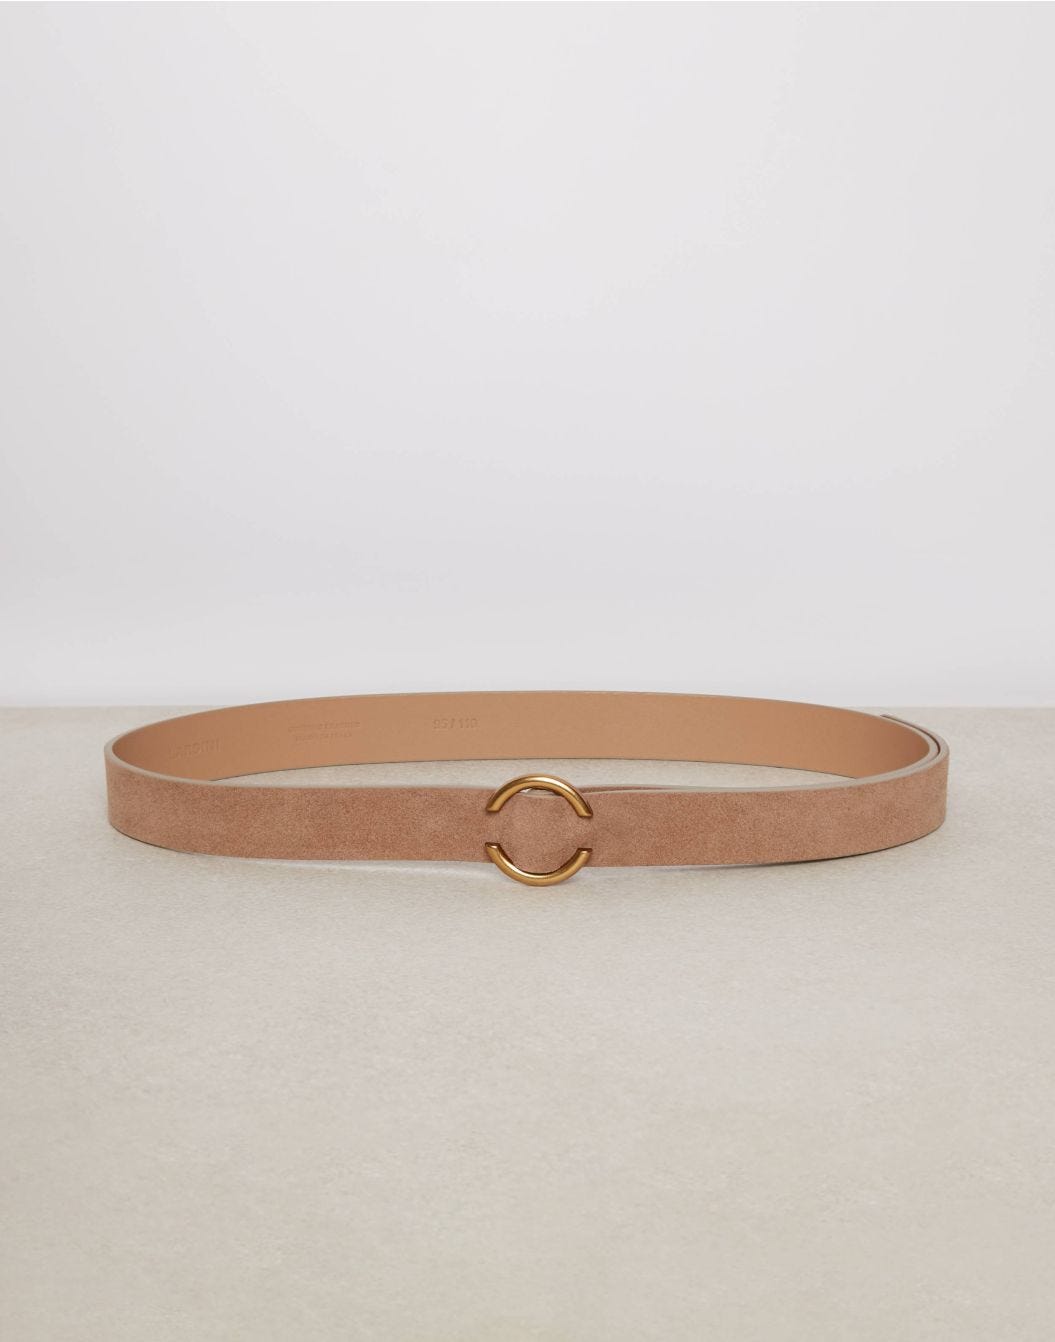 Camel-brown belt in calf suede with buckle detail